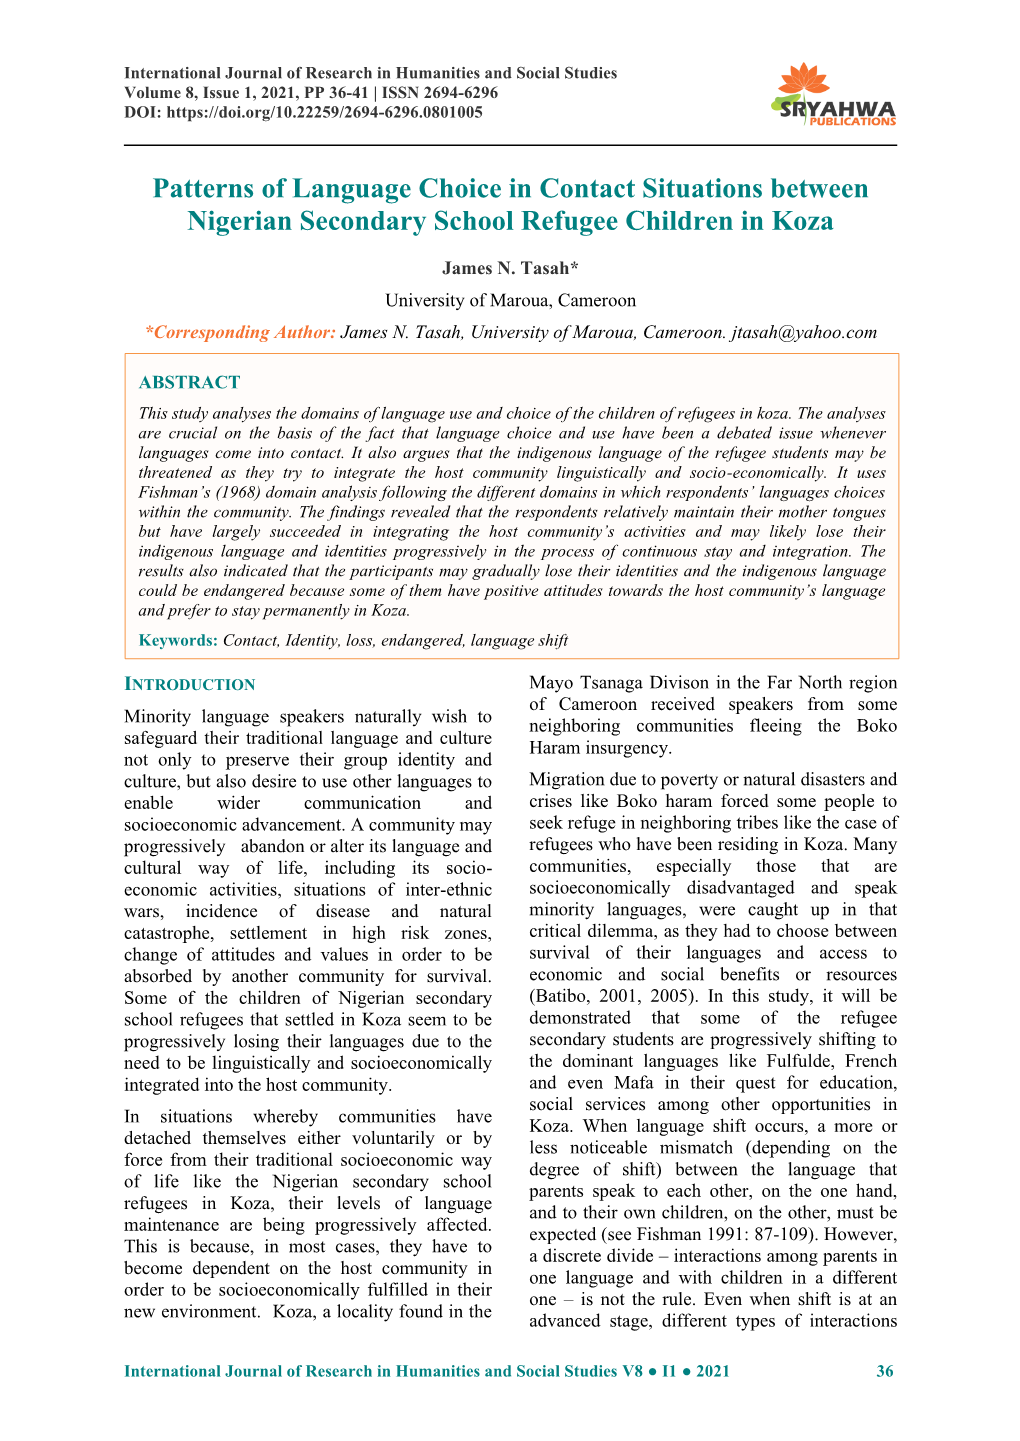 Patterns of Language Choice in Contact Situations Between Nigerian Secondary School Refugee Children in Koza